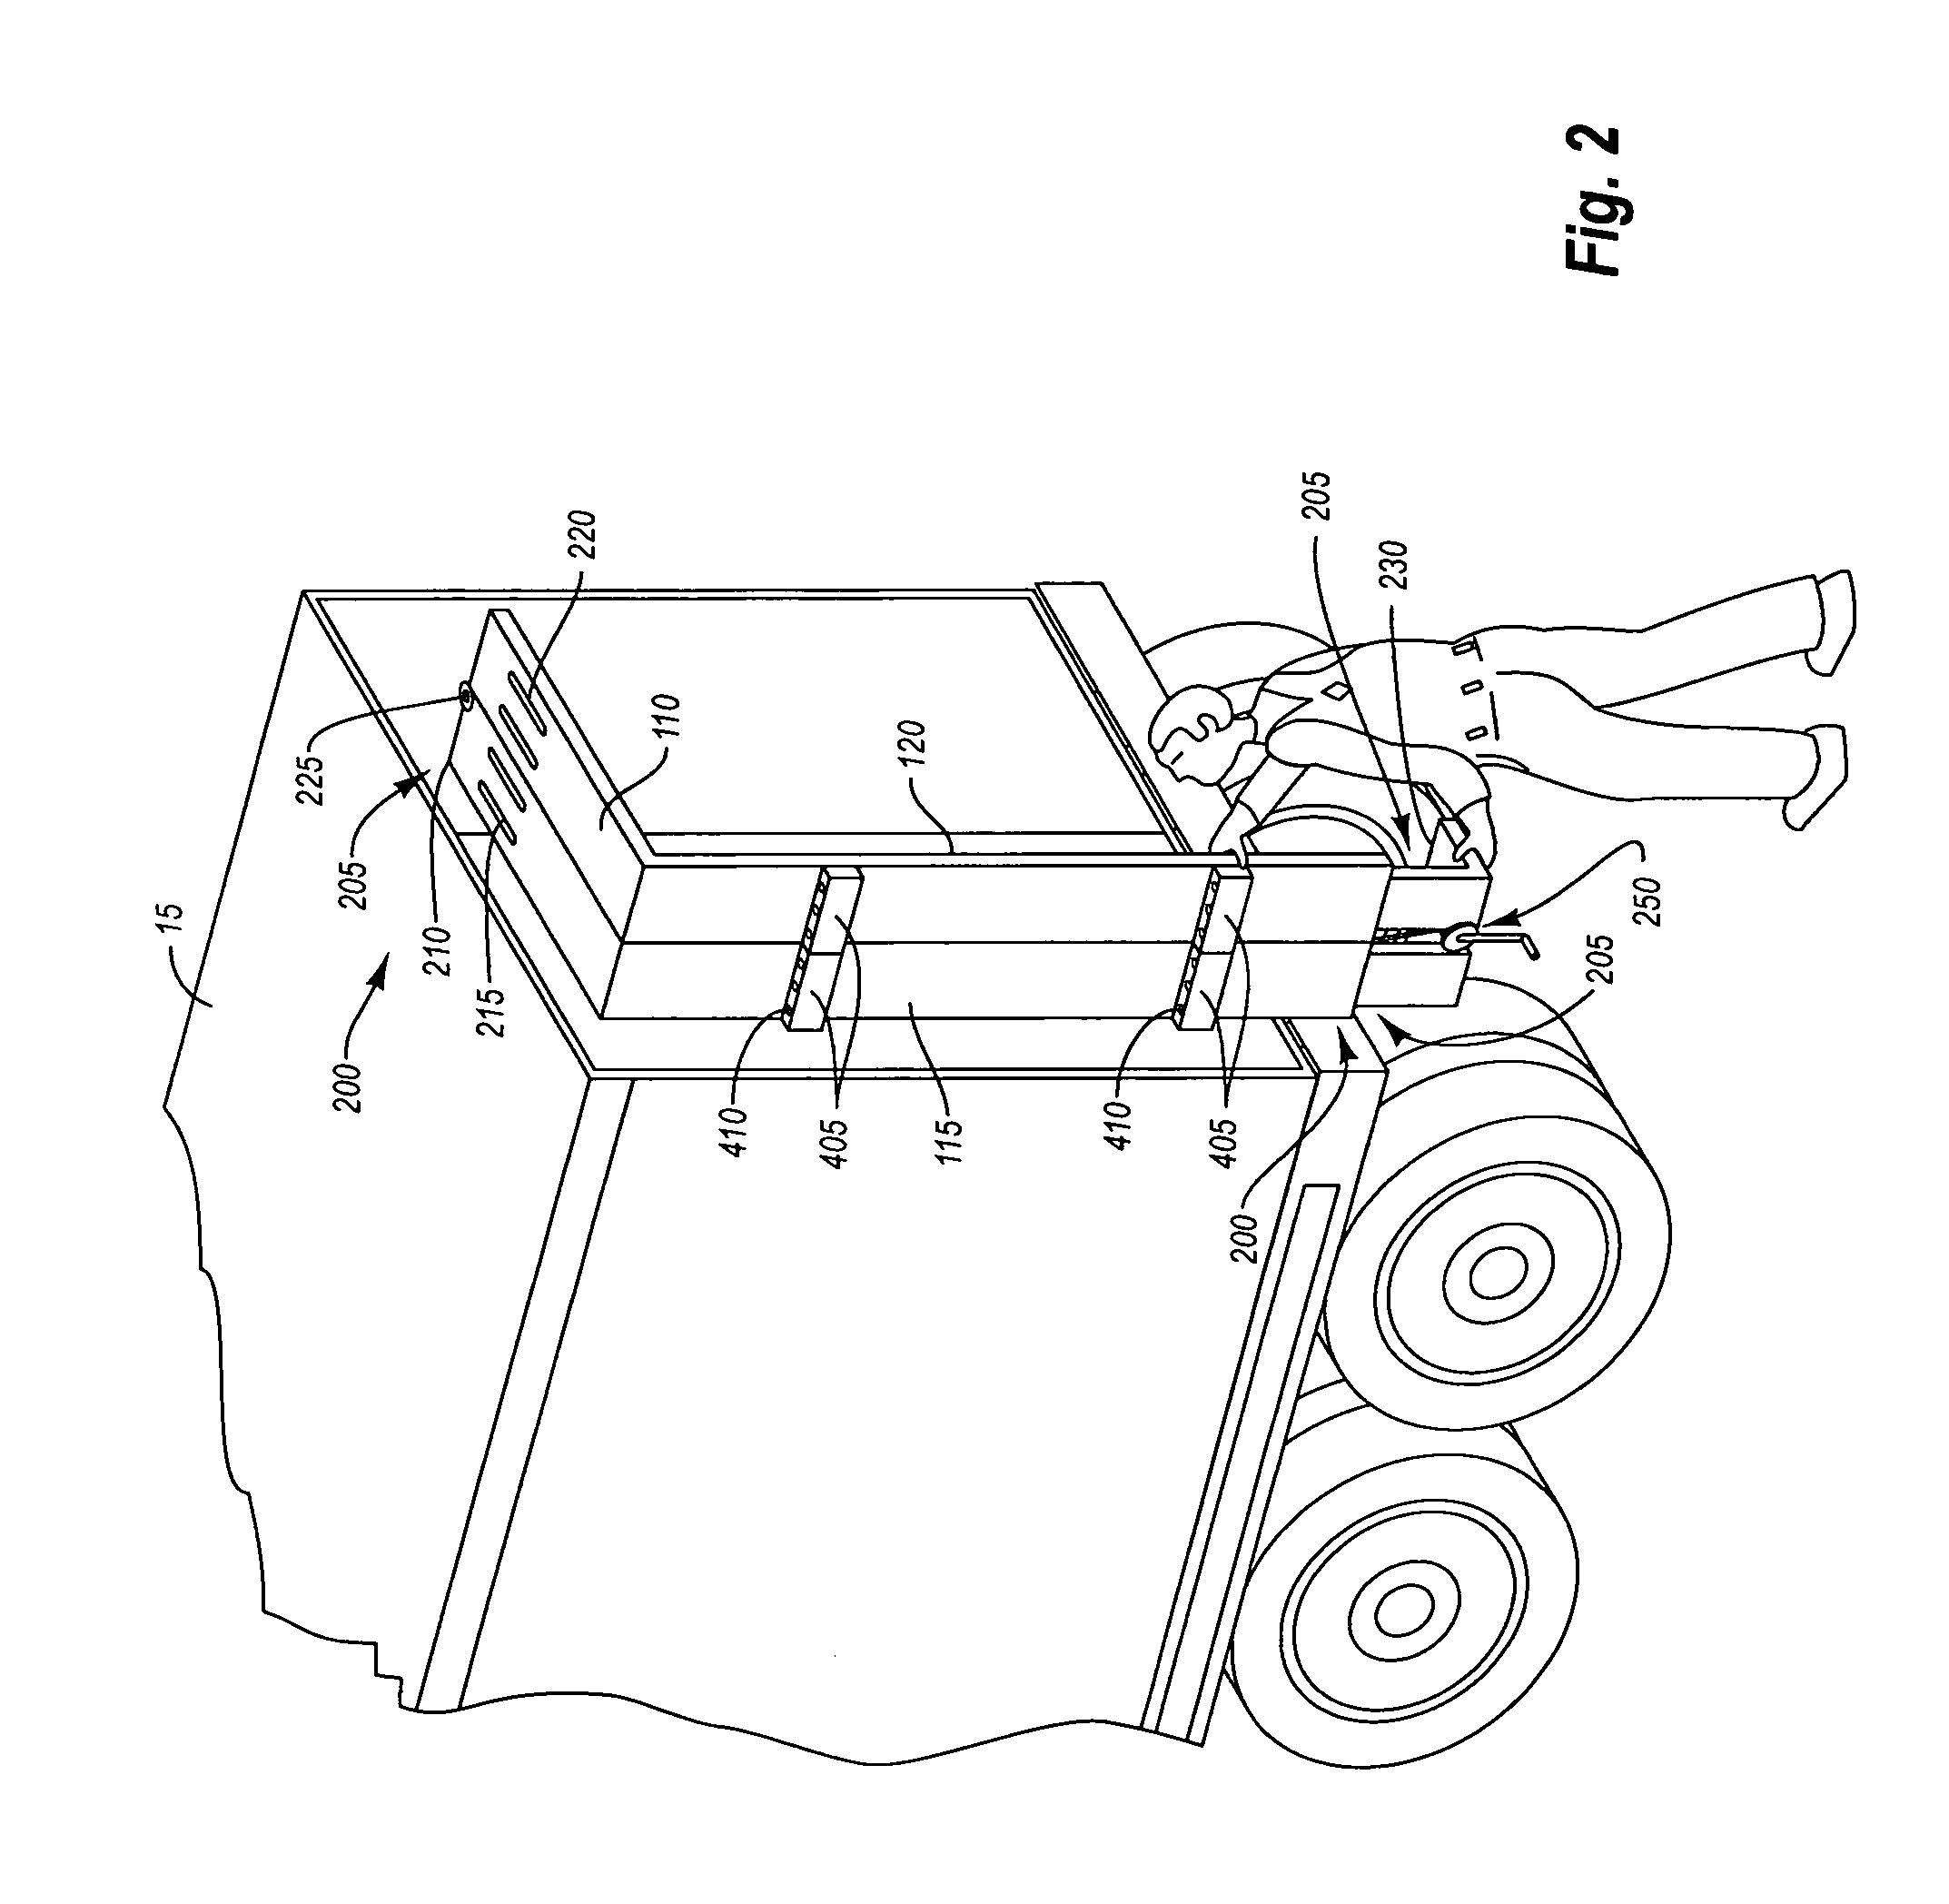 Aerodynamic drag reducing system with retrofittable, selectively removable frame